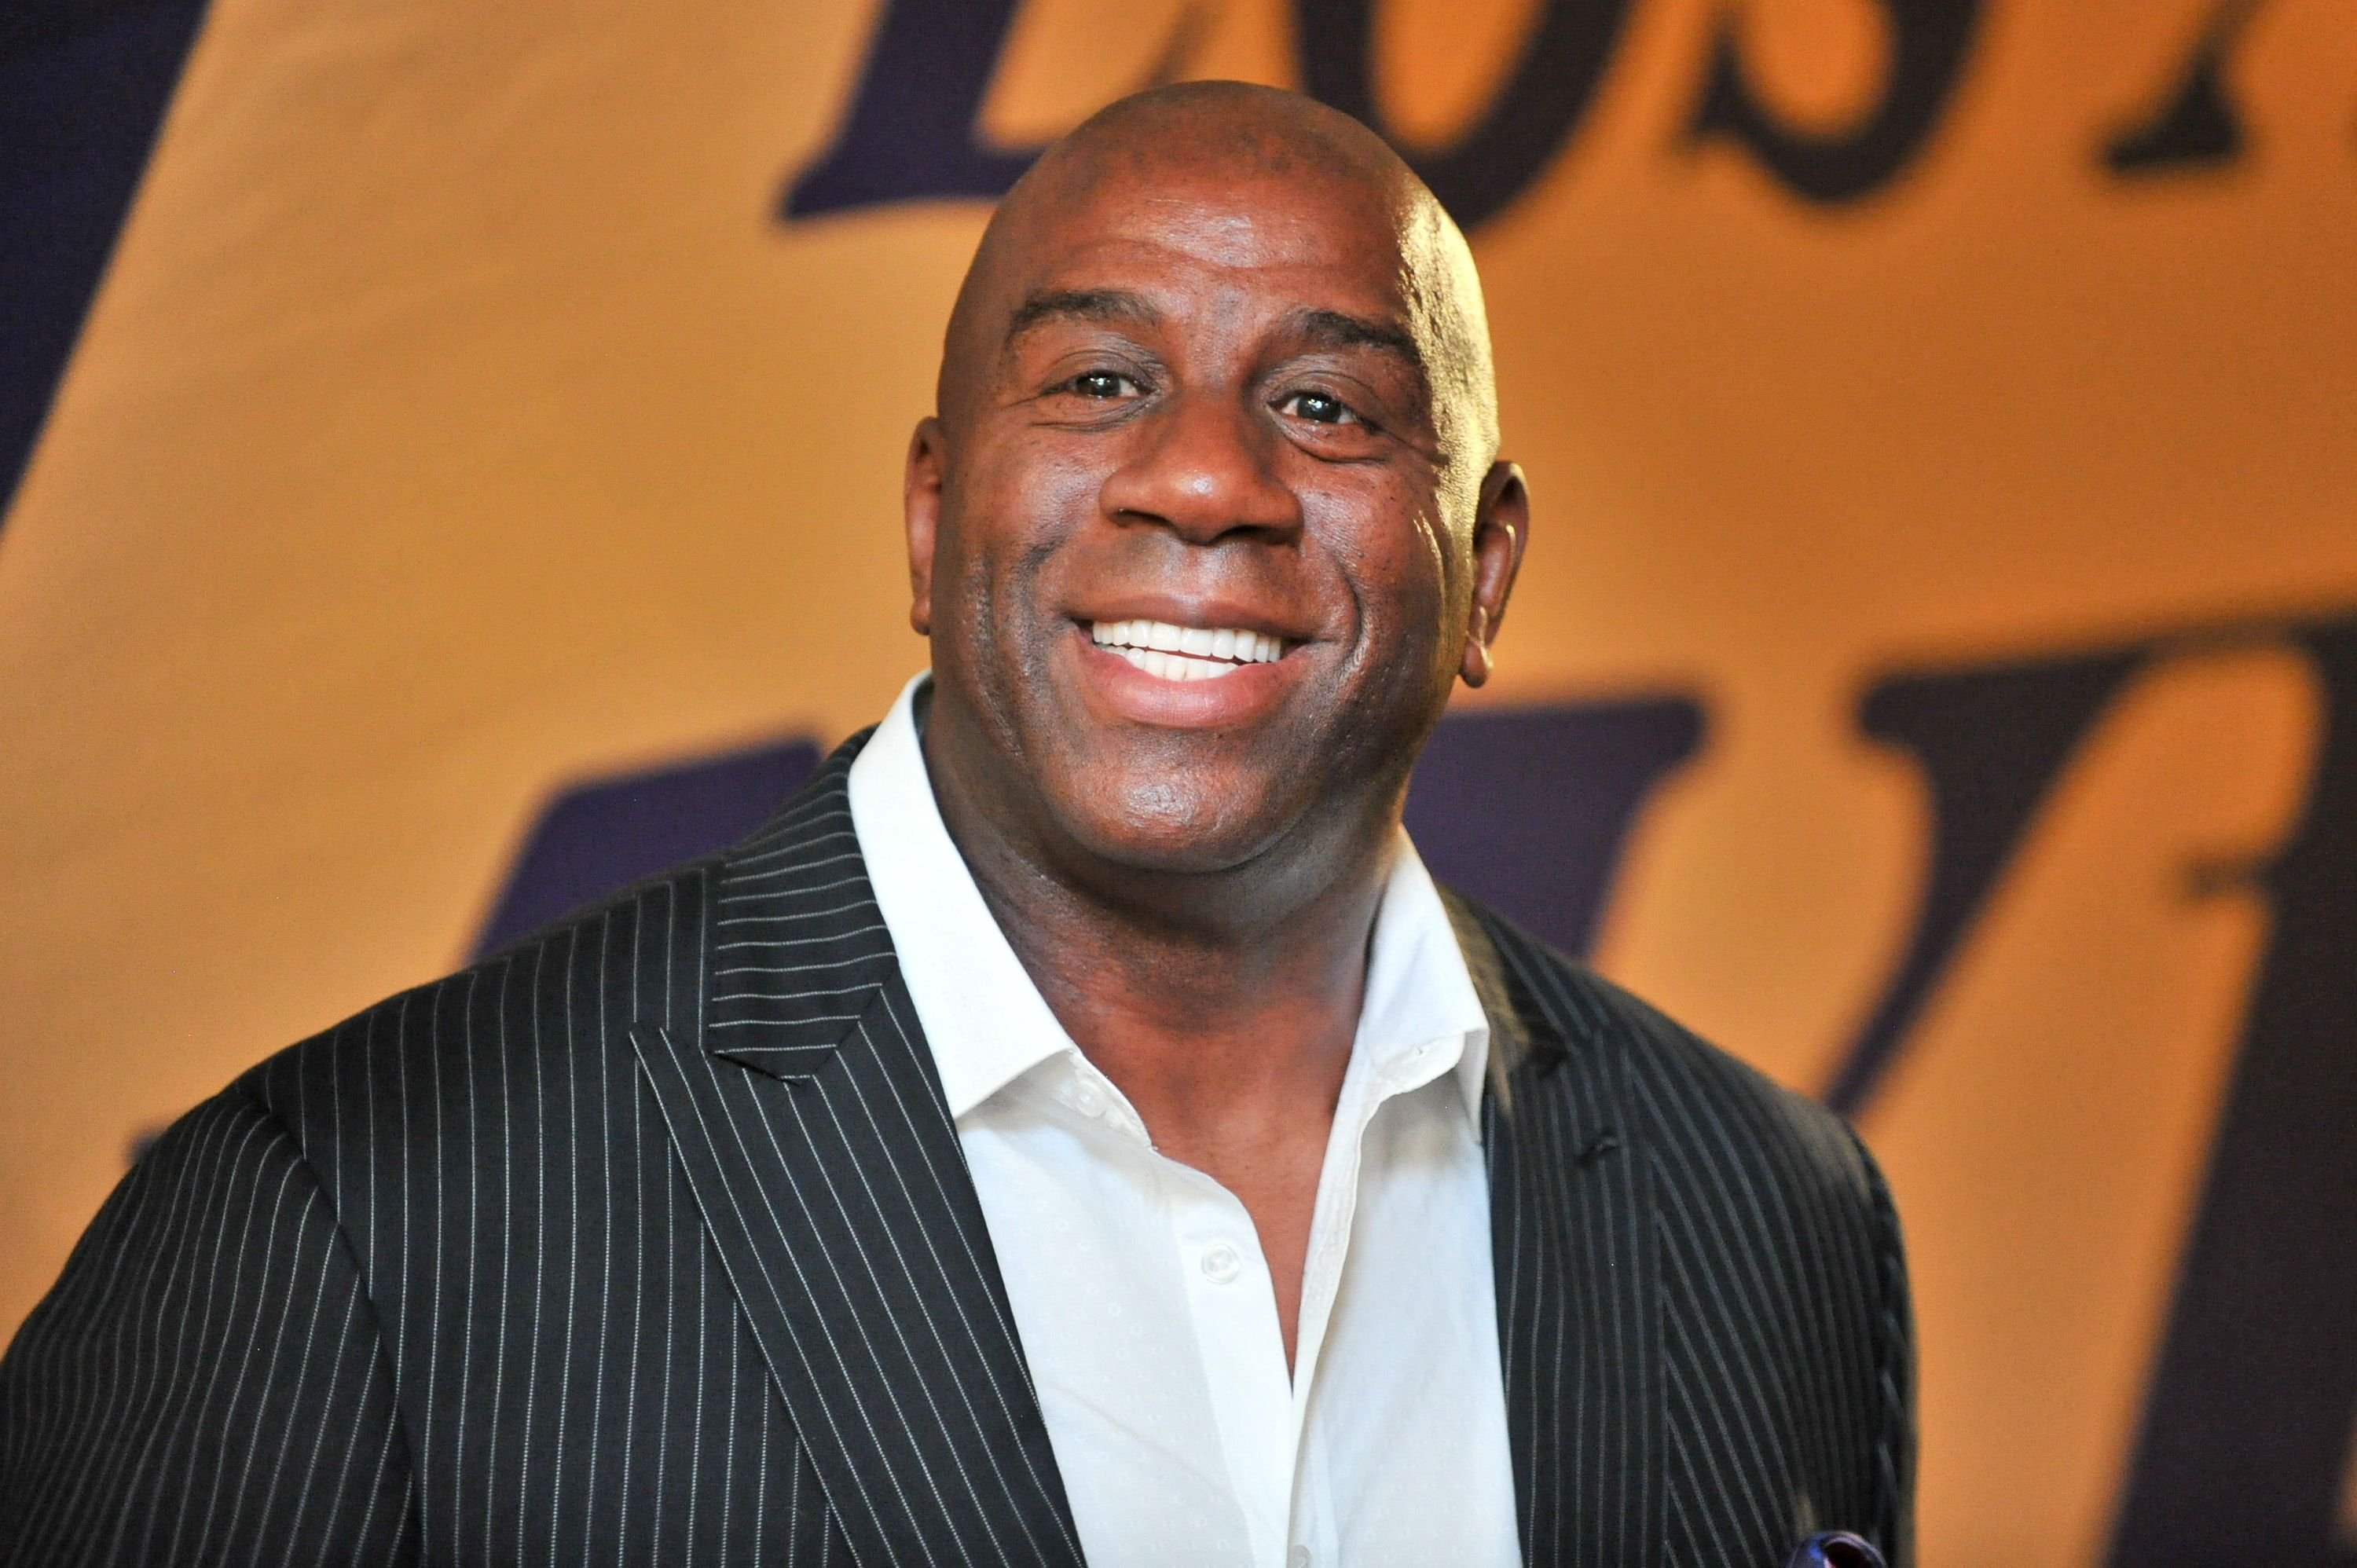 Magic Johnson during a basketball game between the Los Angeles Lakers and the Los Angeles Clippers at Staples Center on October 19, 2017 in Los Angeles, California. | Source: Getty Images